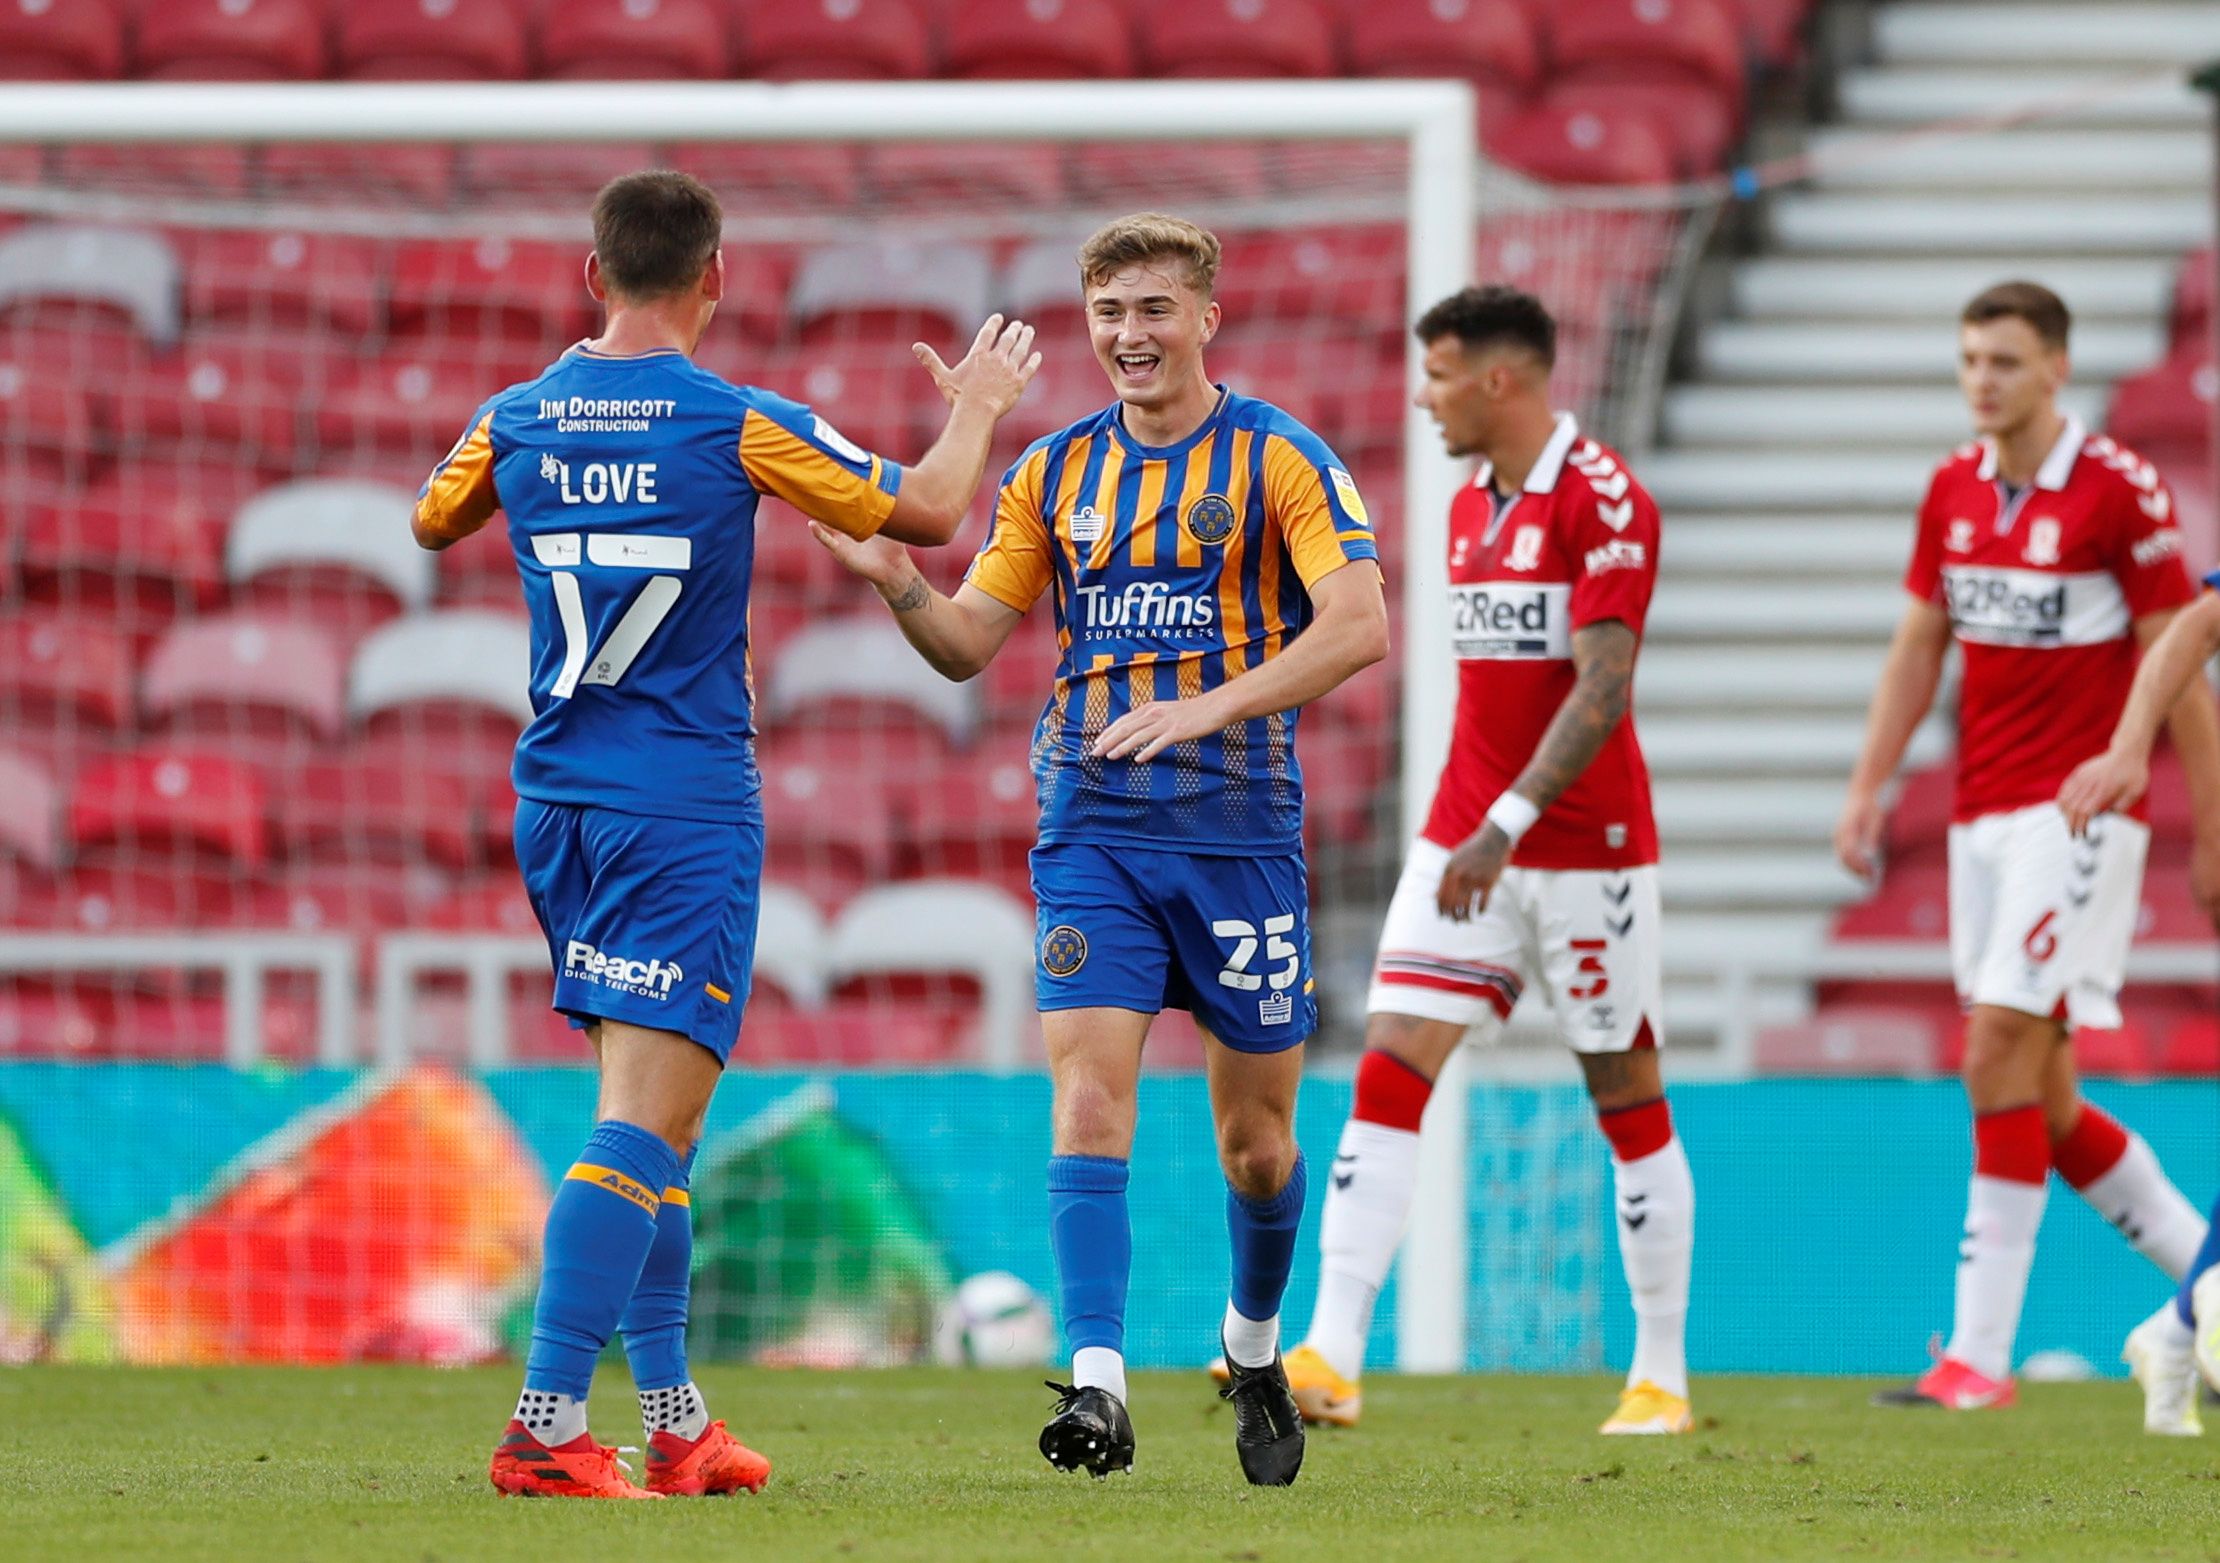 Soccer Football - Carabao Cup First Round - Middlesbrough v Shrewsbury Town - Riverside Stadium, Middlesbrough, Britain - September 4, 2020   Shrewsbury Town's Scott High celebrates scoring their first goal   Action Images/Lee Smith